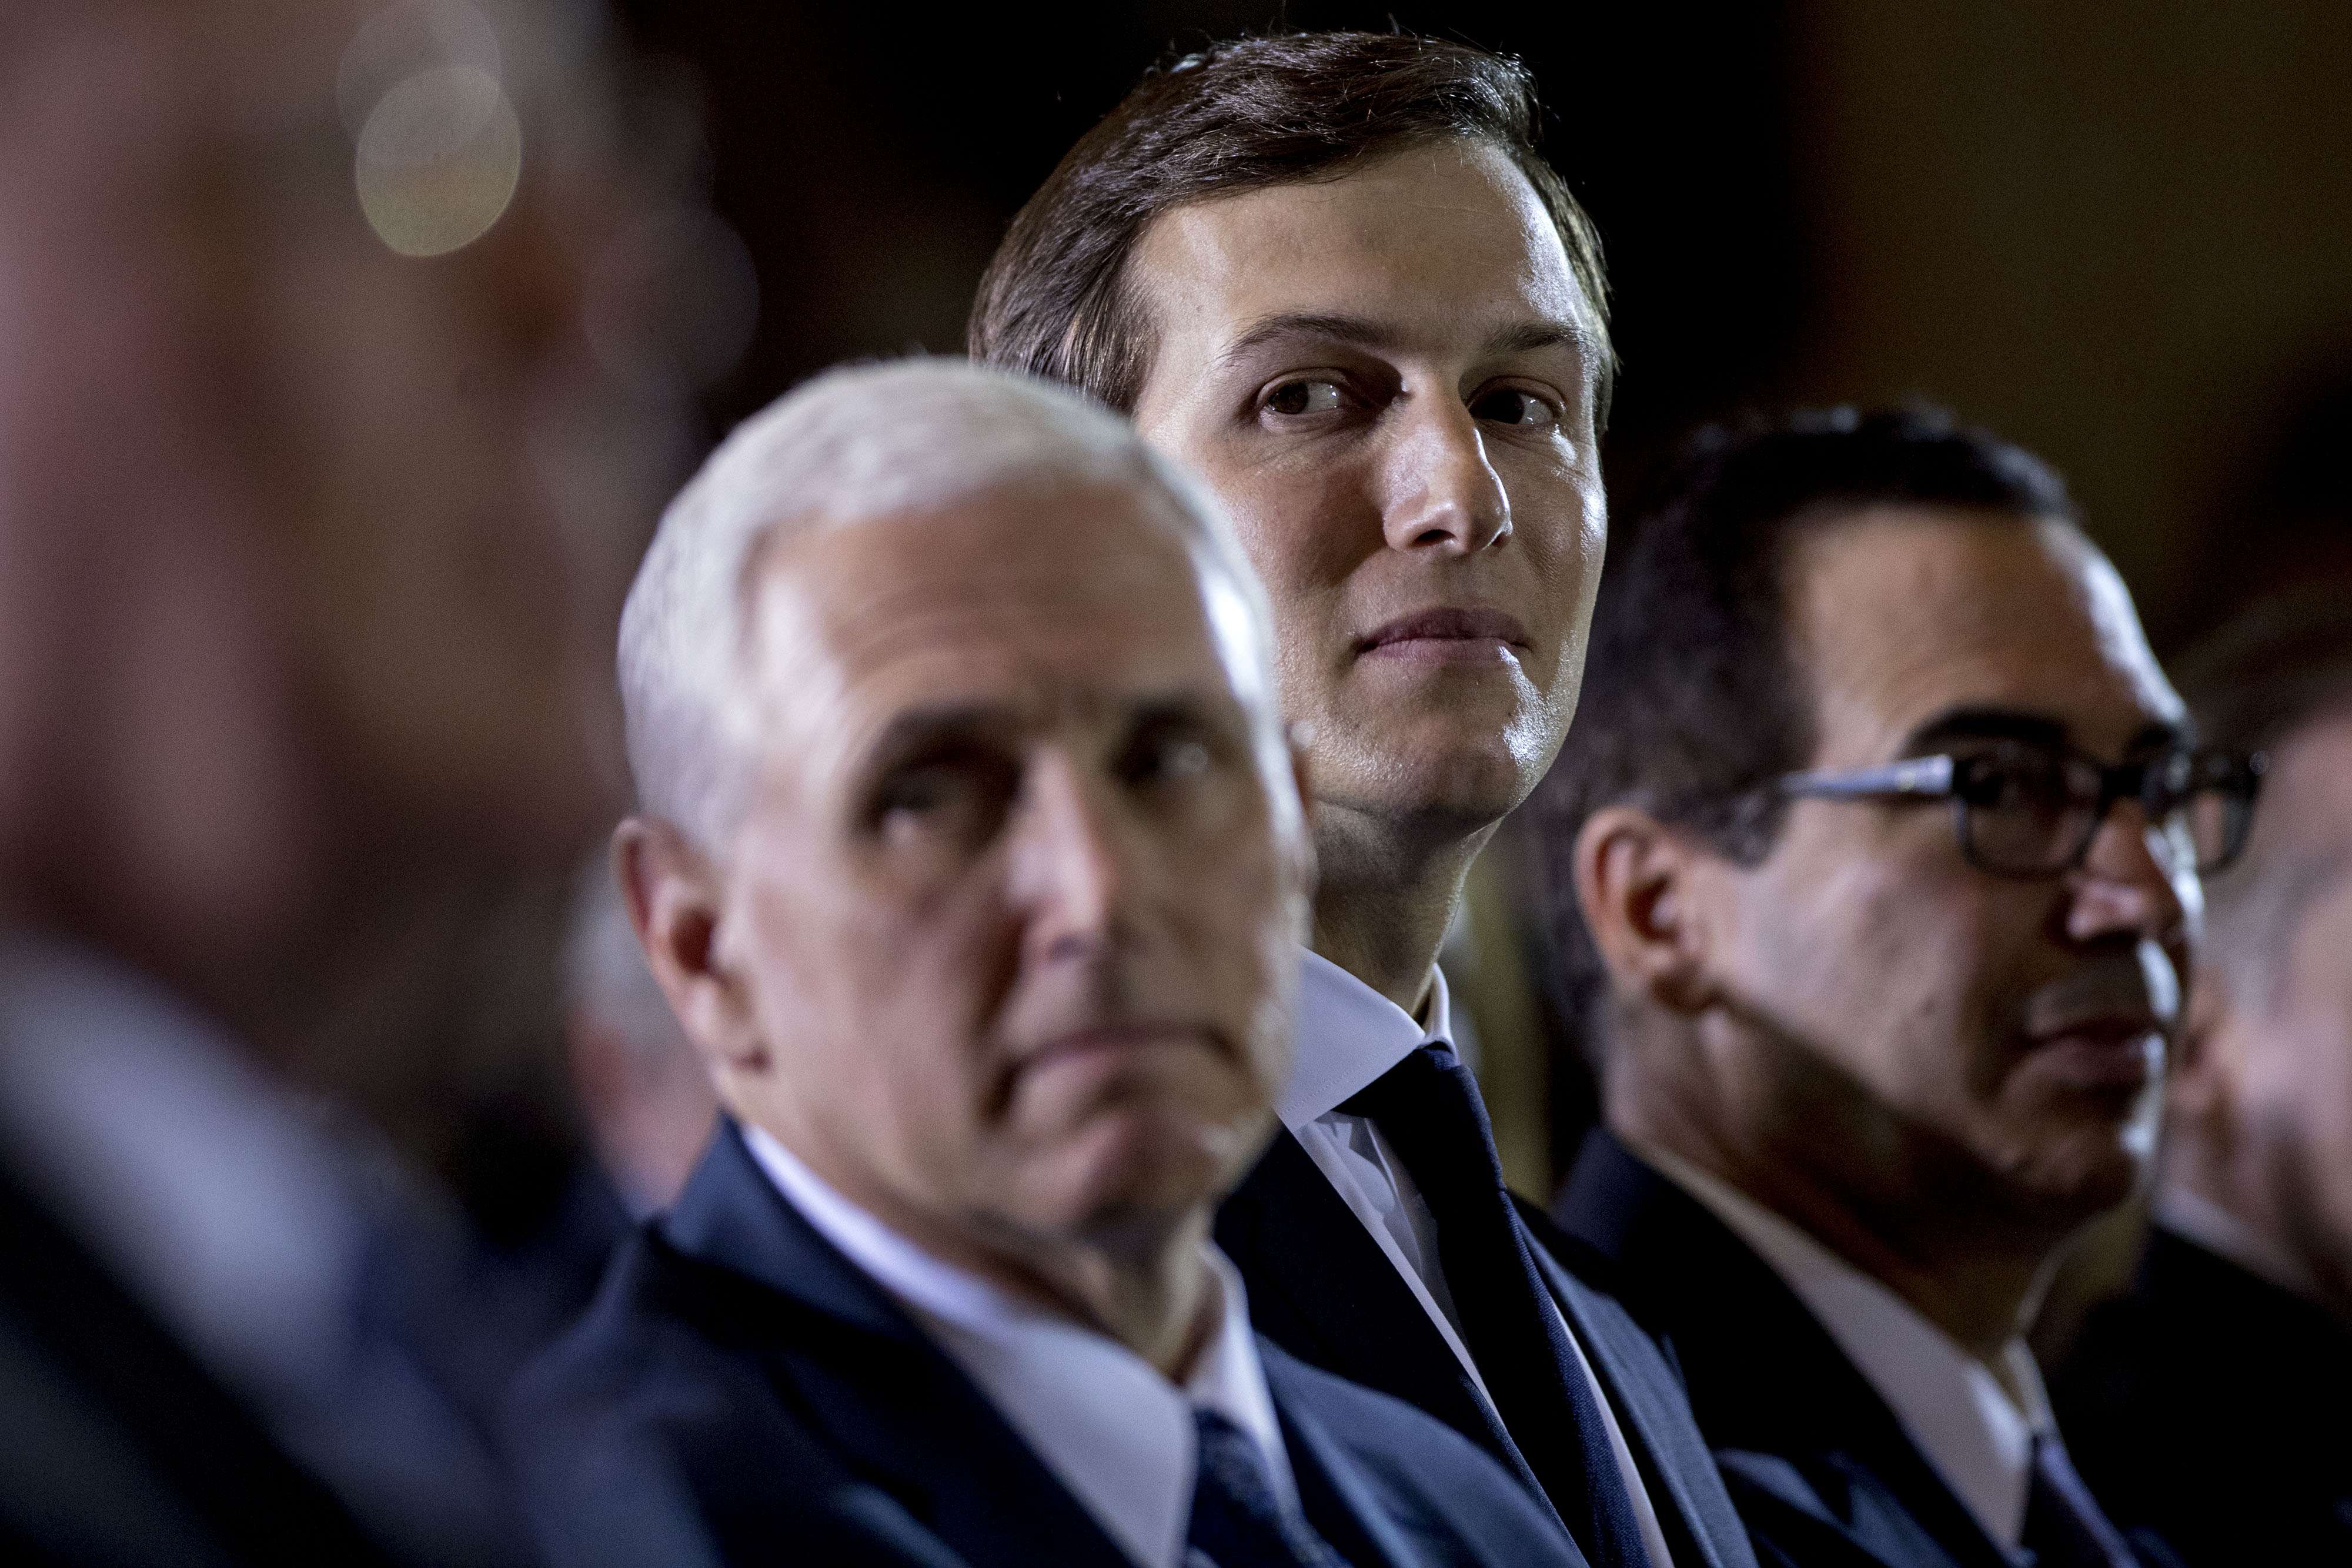 Jared Kushner, senior White House adviser and son-in-law of US President Donald Trump, is part of a long line of dynastic players in world politics. Photo: Bloomberg